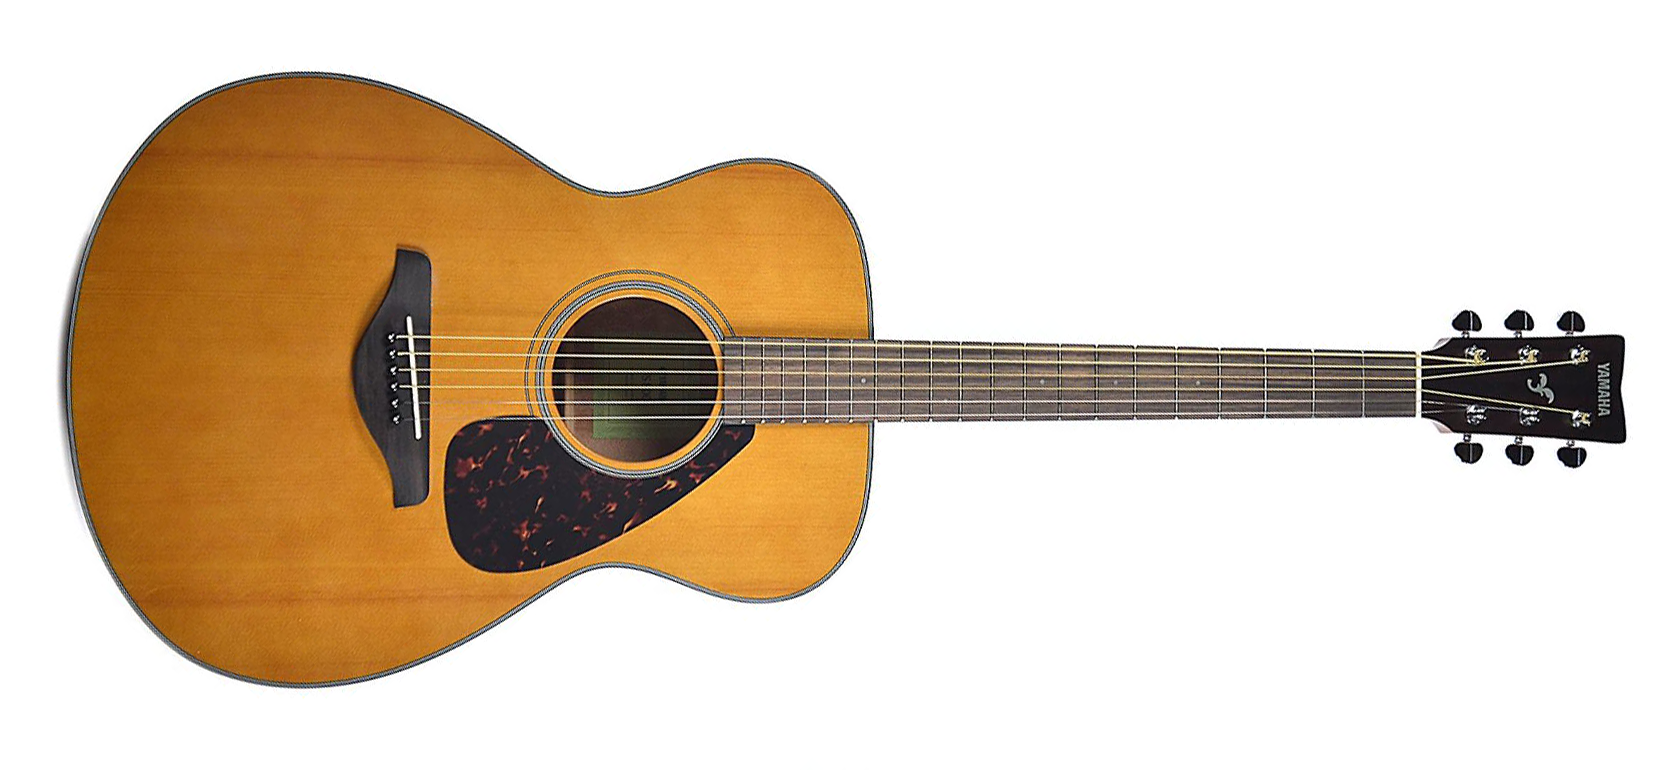  YAMAHA FG800 Solid Top Acoustic Guitar,Natural,Guitar Only :  Musical Instruments